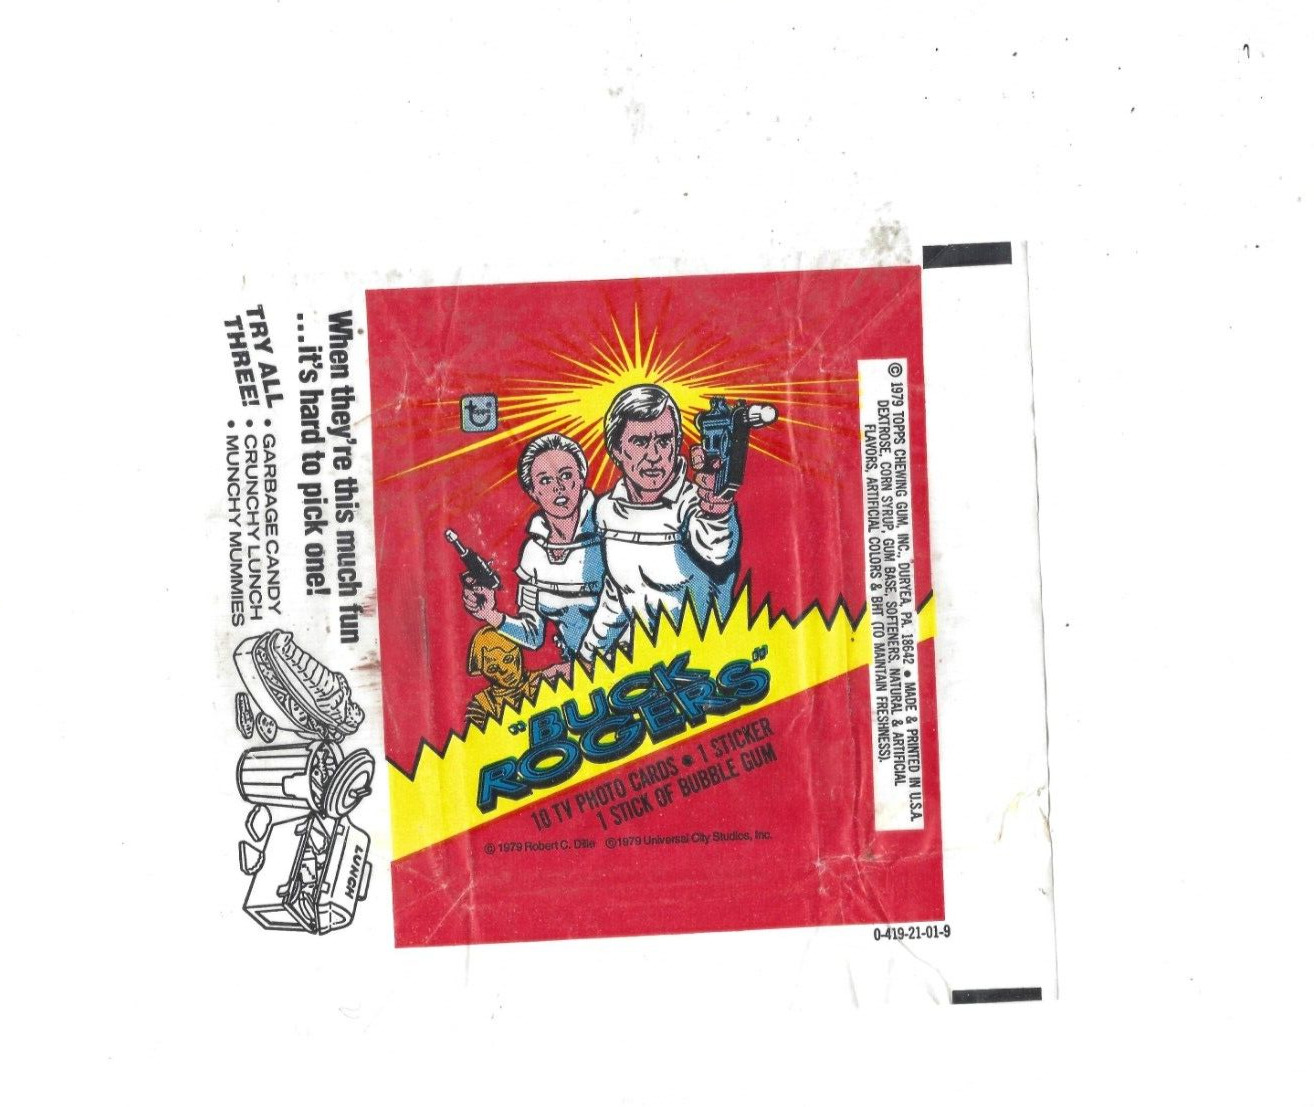 1979 BUCK ROGERS Topps Wax Pack wrapper